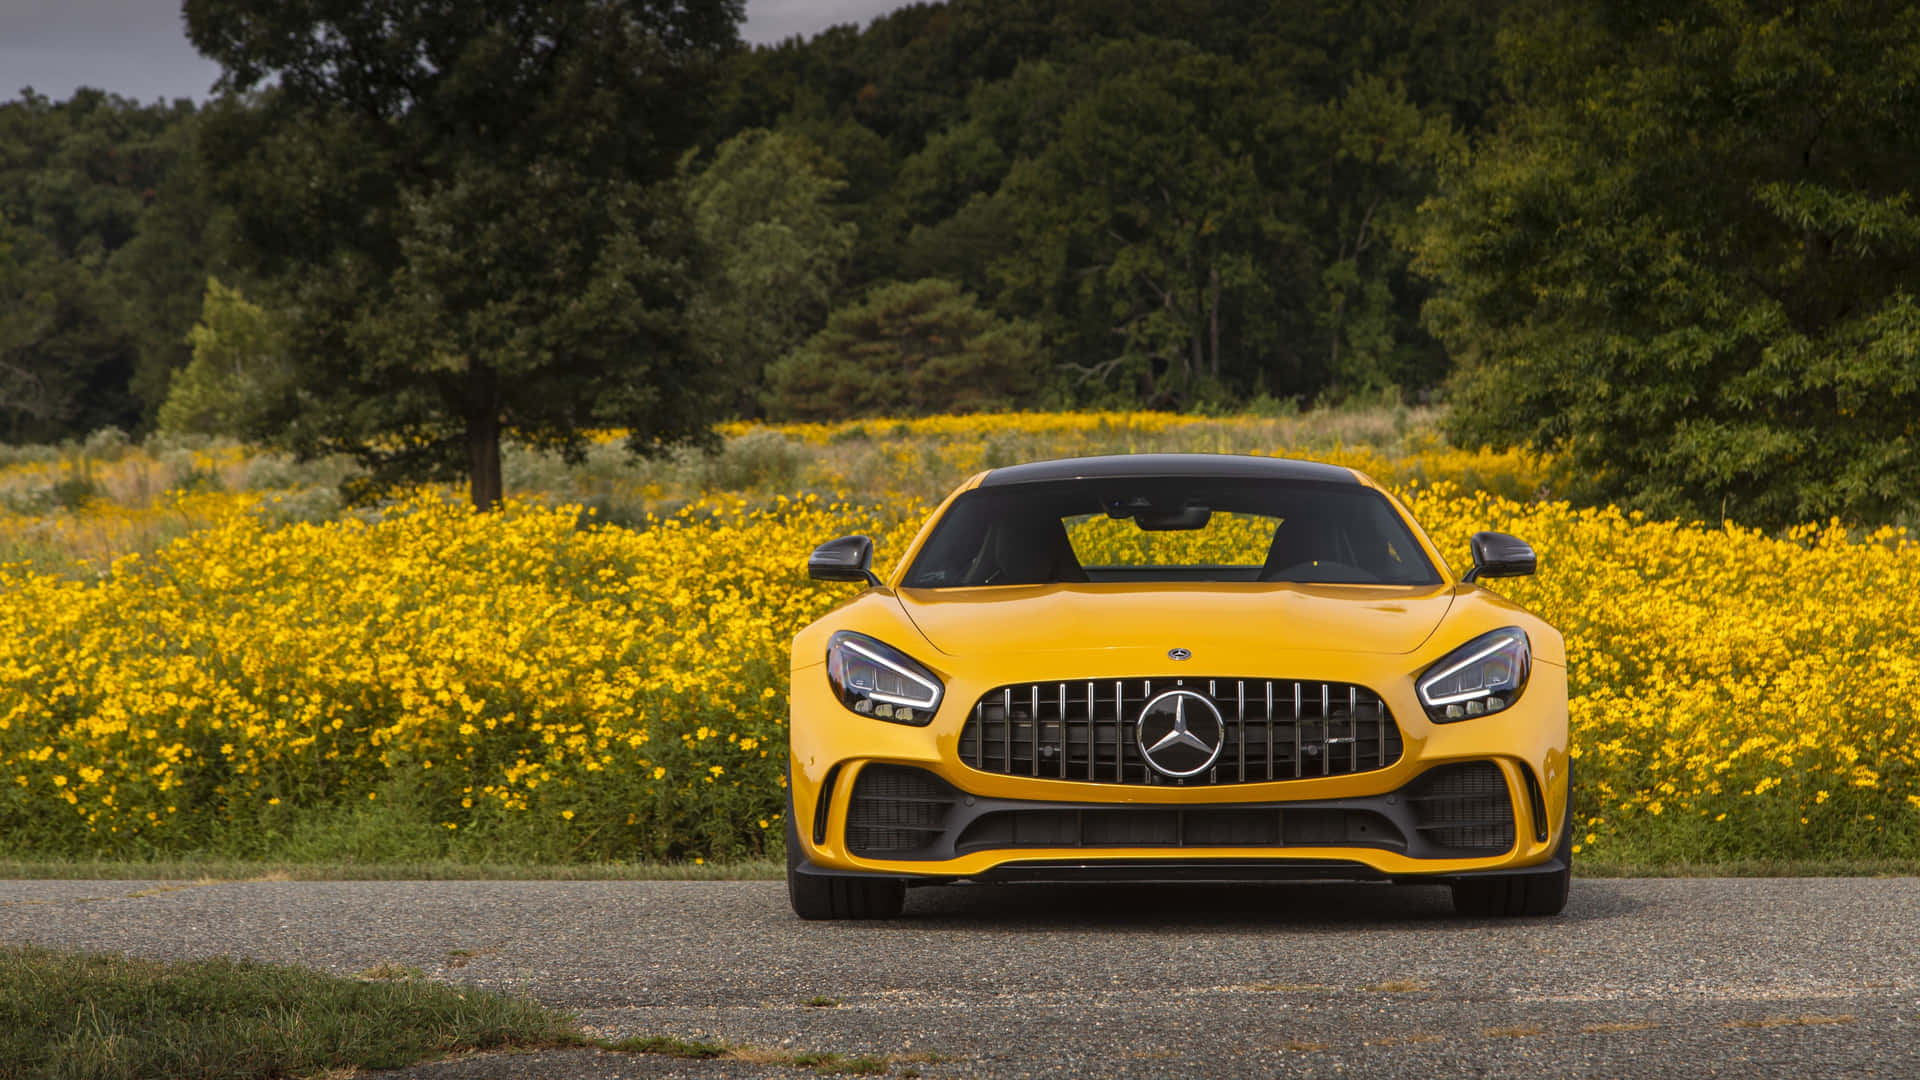 Stunning 4K Mercedes Wallpaper Showcasing a Luxury Vehicle in Action